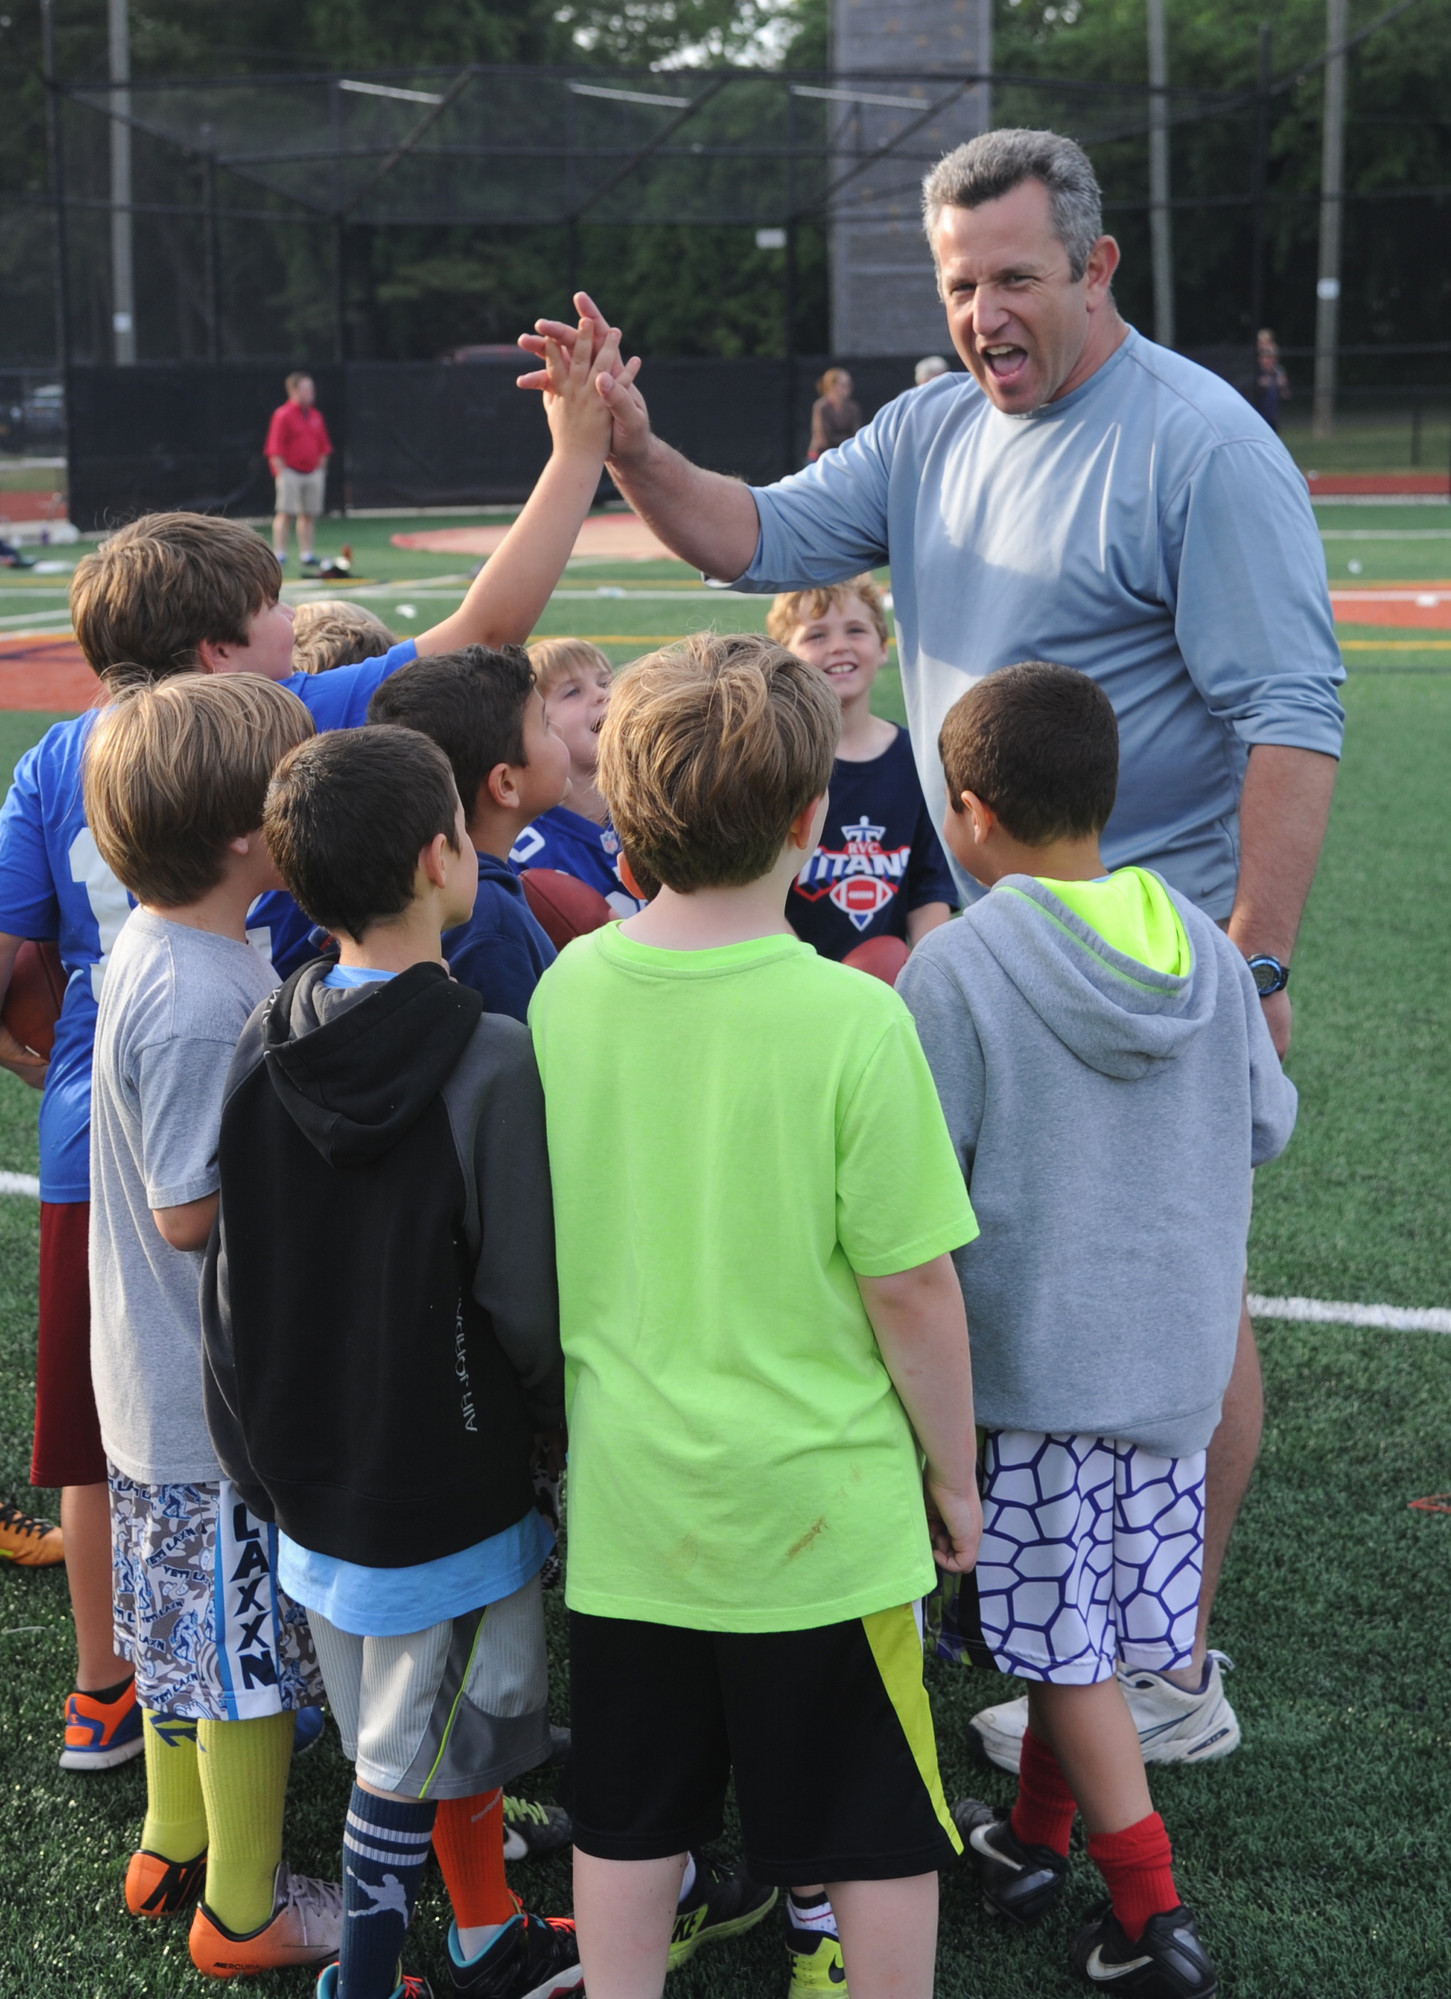 Former NFL quarterback Jay Fiedler provided instruction for future signal-callers.